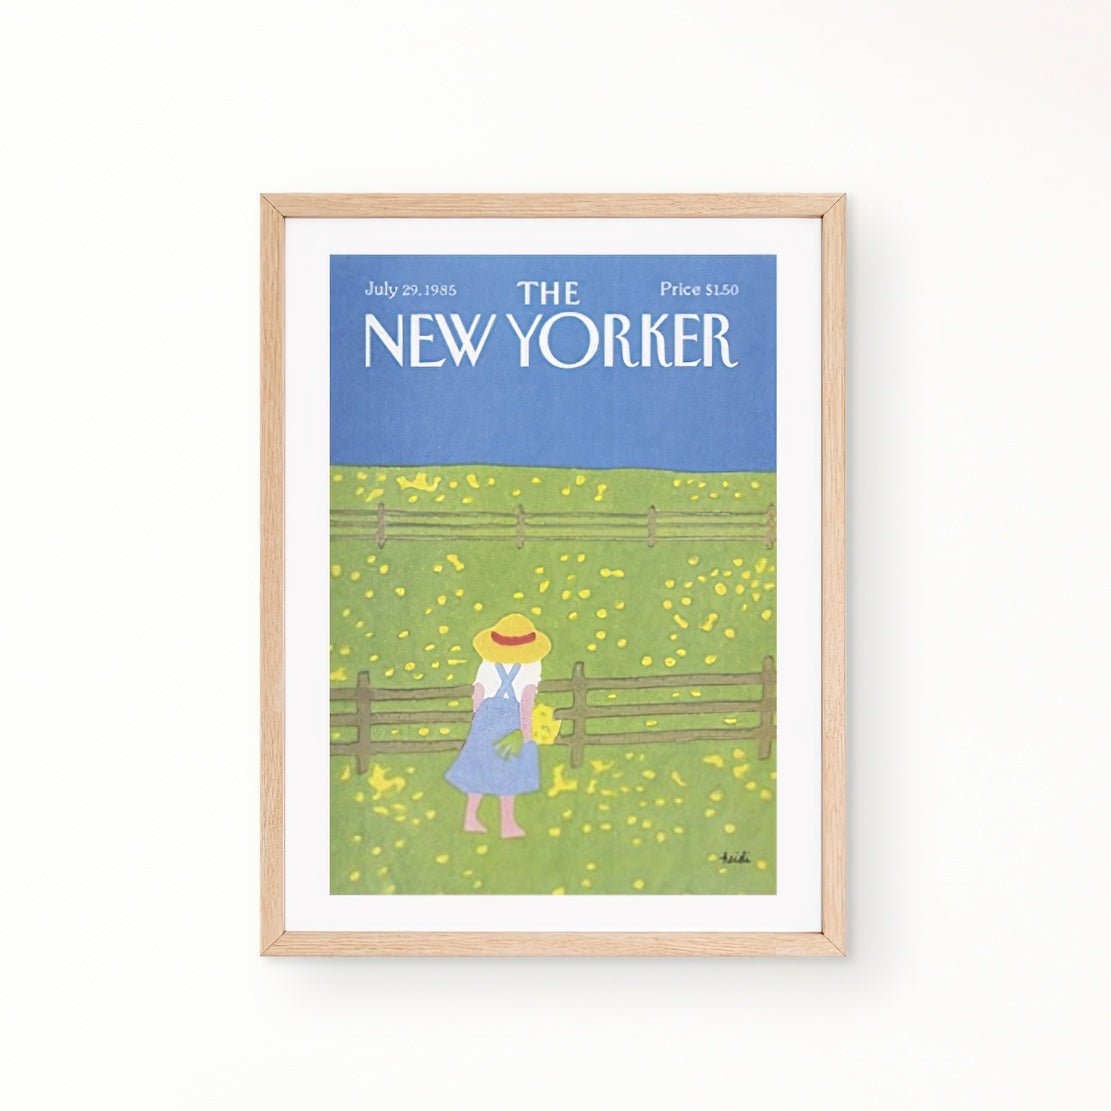 The New Yorker vintage cover green field with yellow flowers, blue sky and a girl